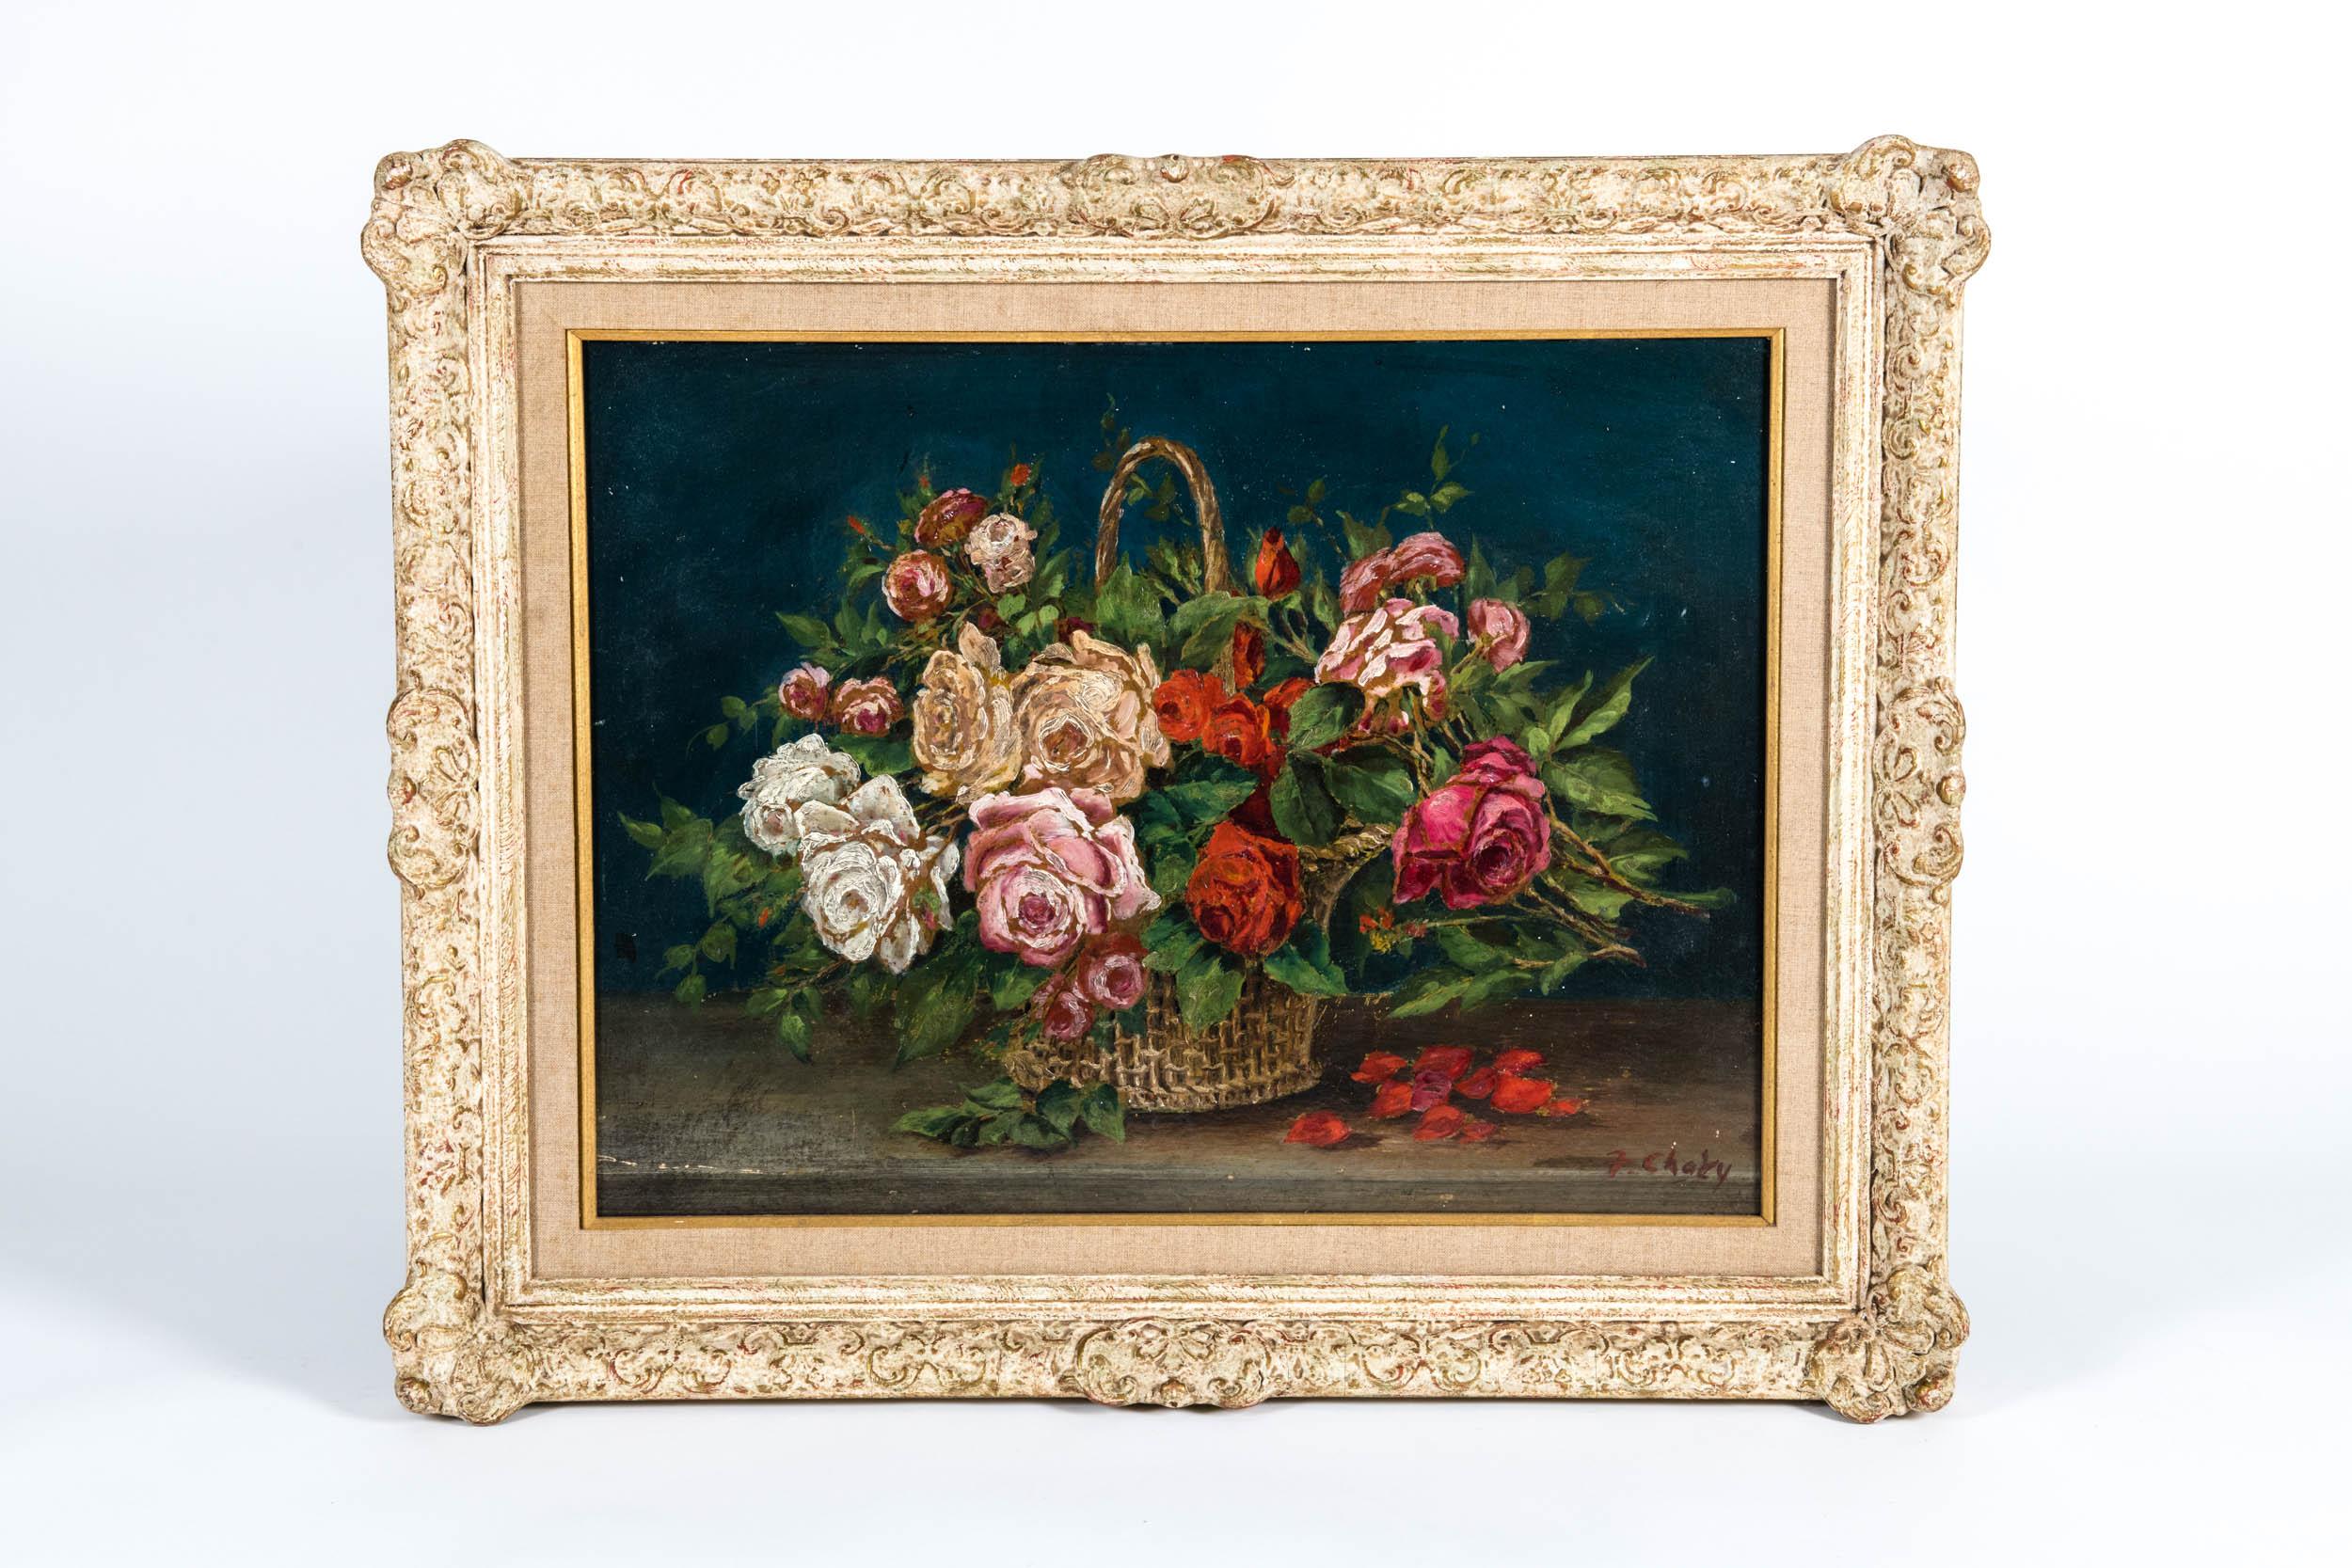 Early 20th century oil on board still life painting of flowers with wood frame. Artist signature on the lower left corner. The painting is in excellent vintage condition, minor wear the frame consistent with age / use. The painting measure about 23